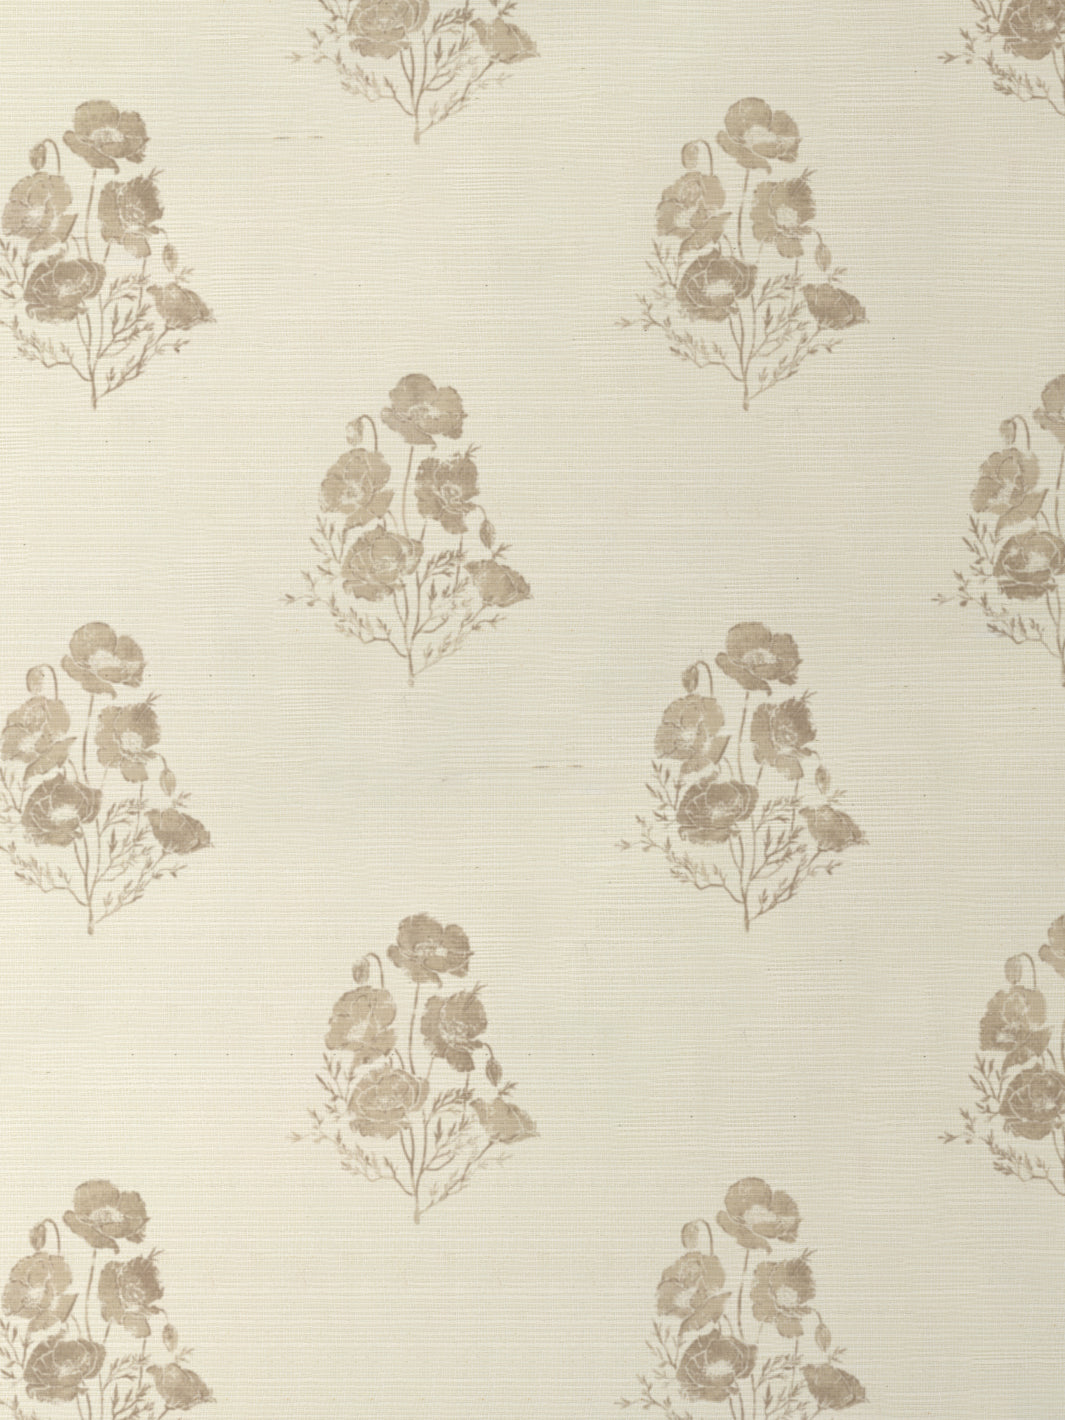 'California Poppy' Grasscloth Wallpaper by Nathan Turner - Neutral